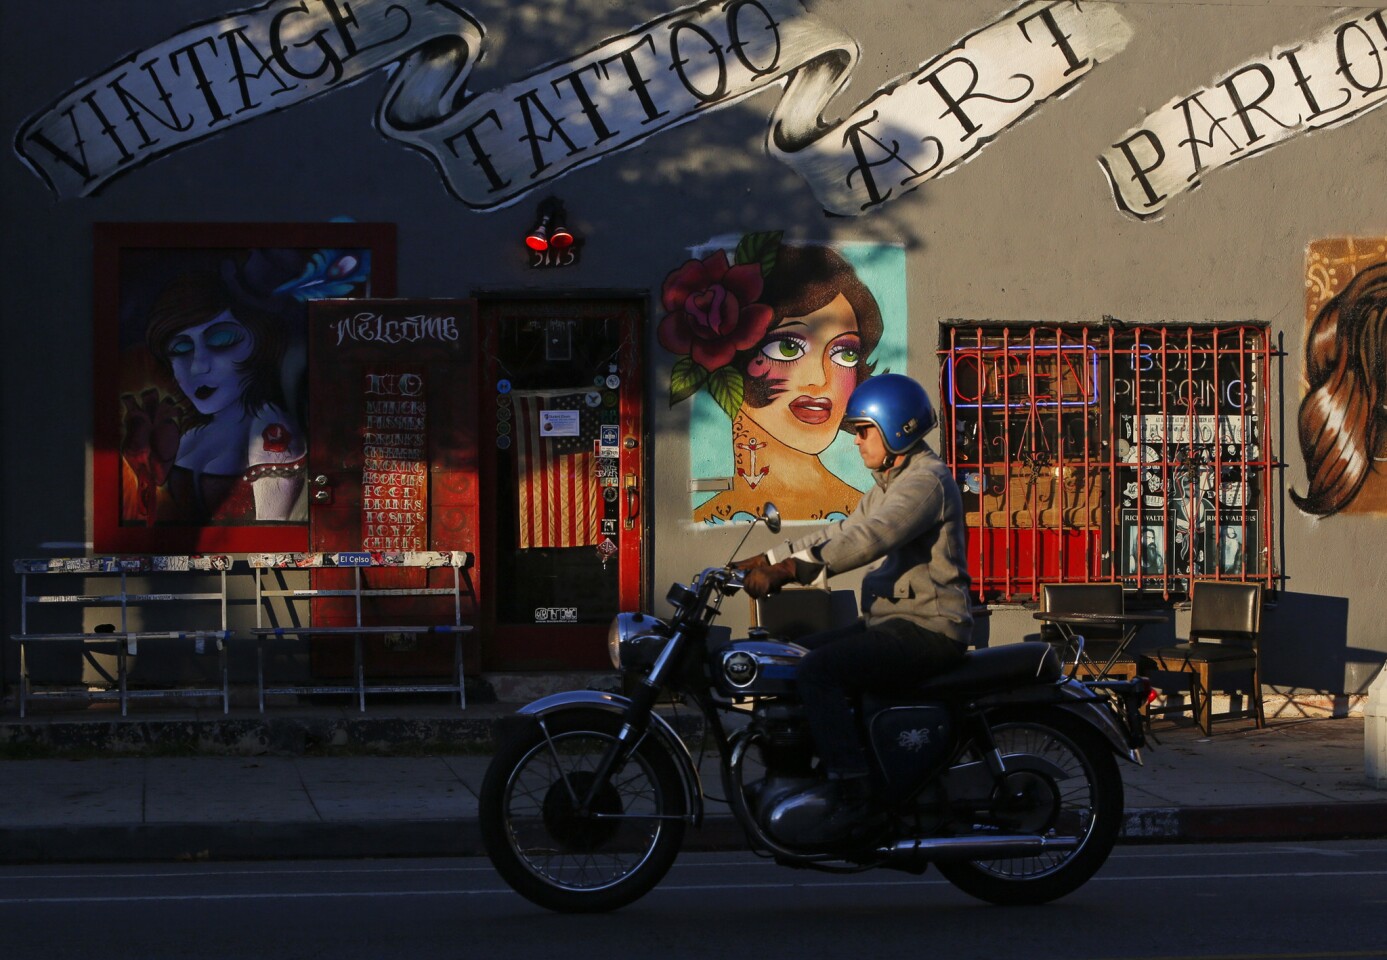 A motorcyclist passes the Vintage Tattoo Art Parlor on York Boulevard in the Highland Park neighborhood of Los Angeles.